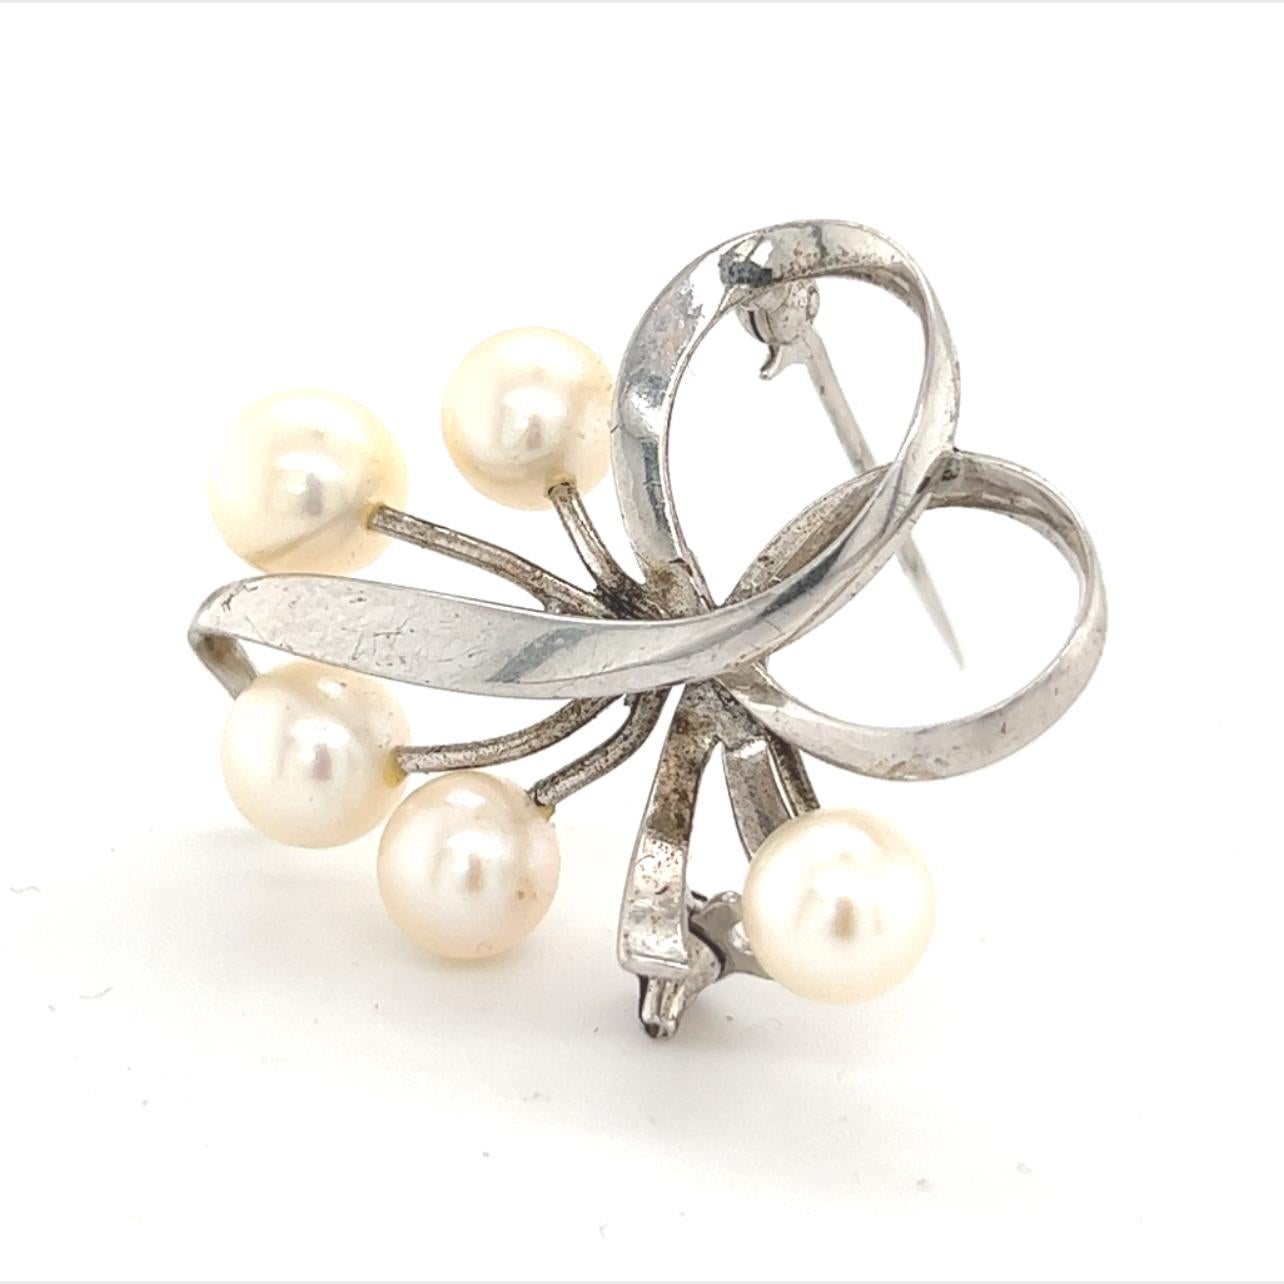 Mikimoto Estate Akoya Pearl Brooch 6.75 mm Sterling Silver For Sale 2